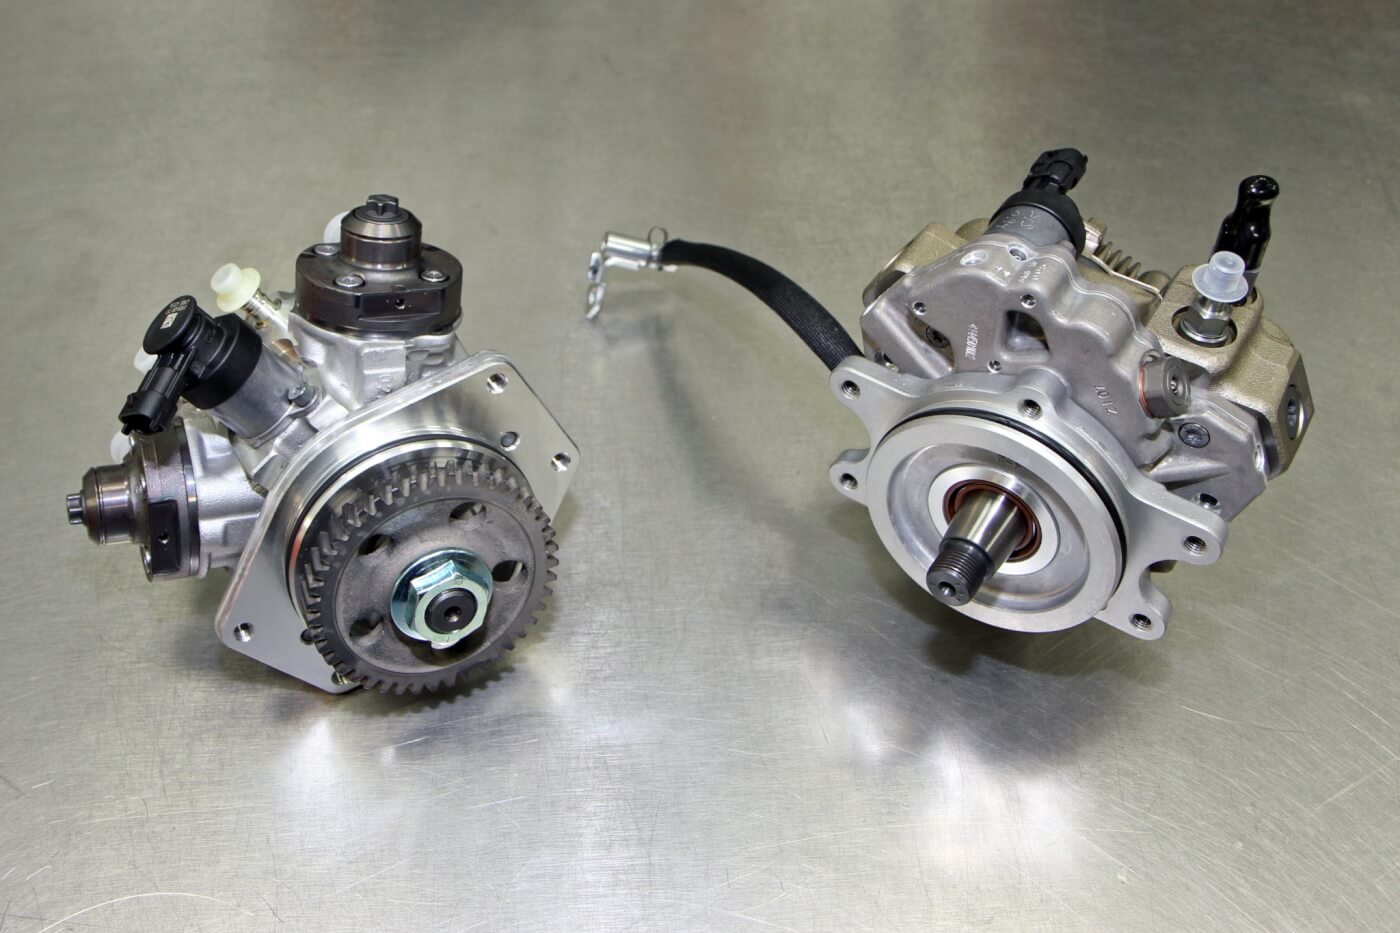 18. A stock CP4 is shown on the left with the S&S replacement CP3 unit shown on the right. The CP4 to CP3 upgrade kit for the Duramax engine will even work with the ninth injector for emissions compliance, while replacing the troublesome CP4 with the more reliable CP3.